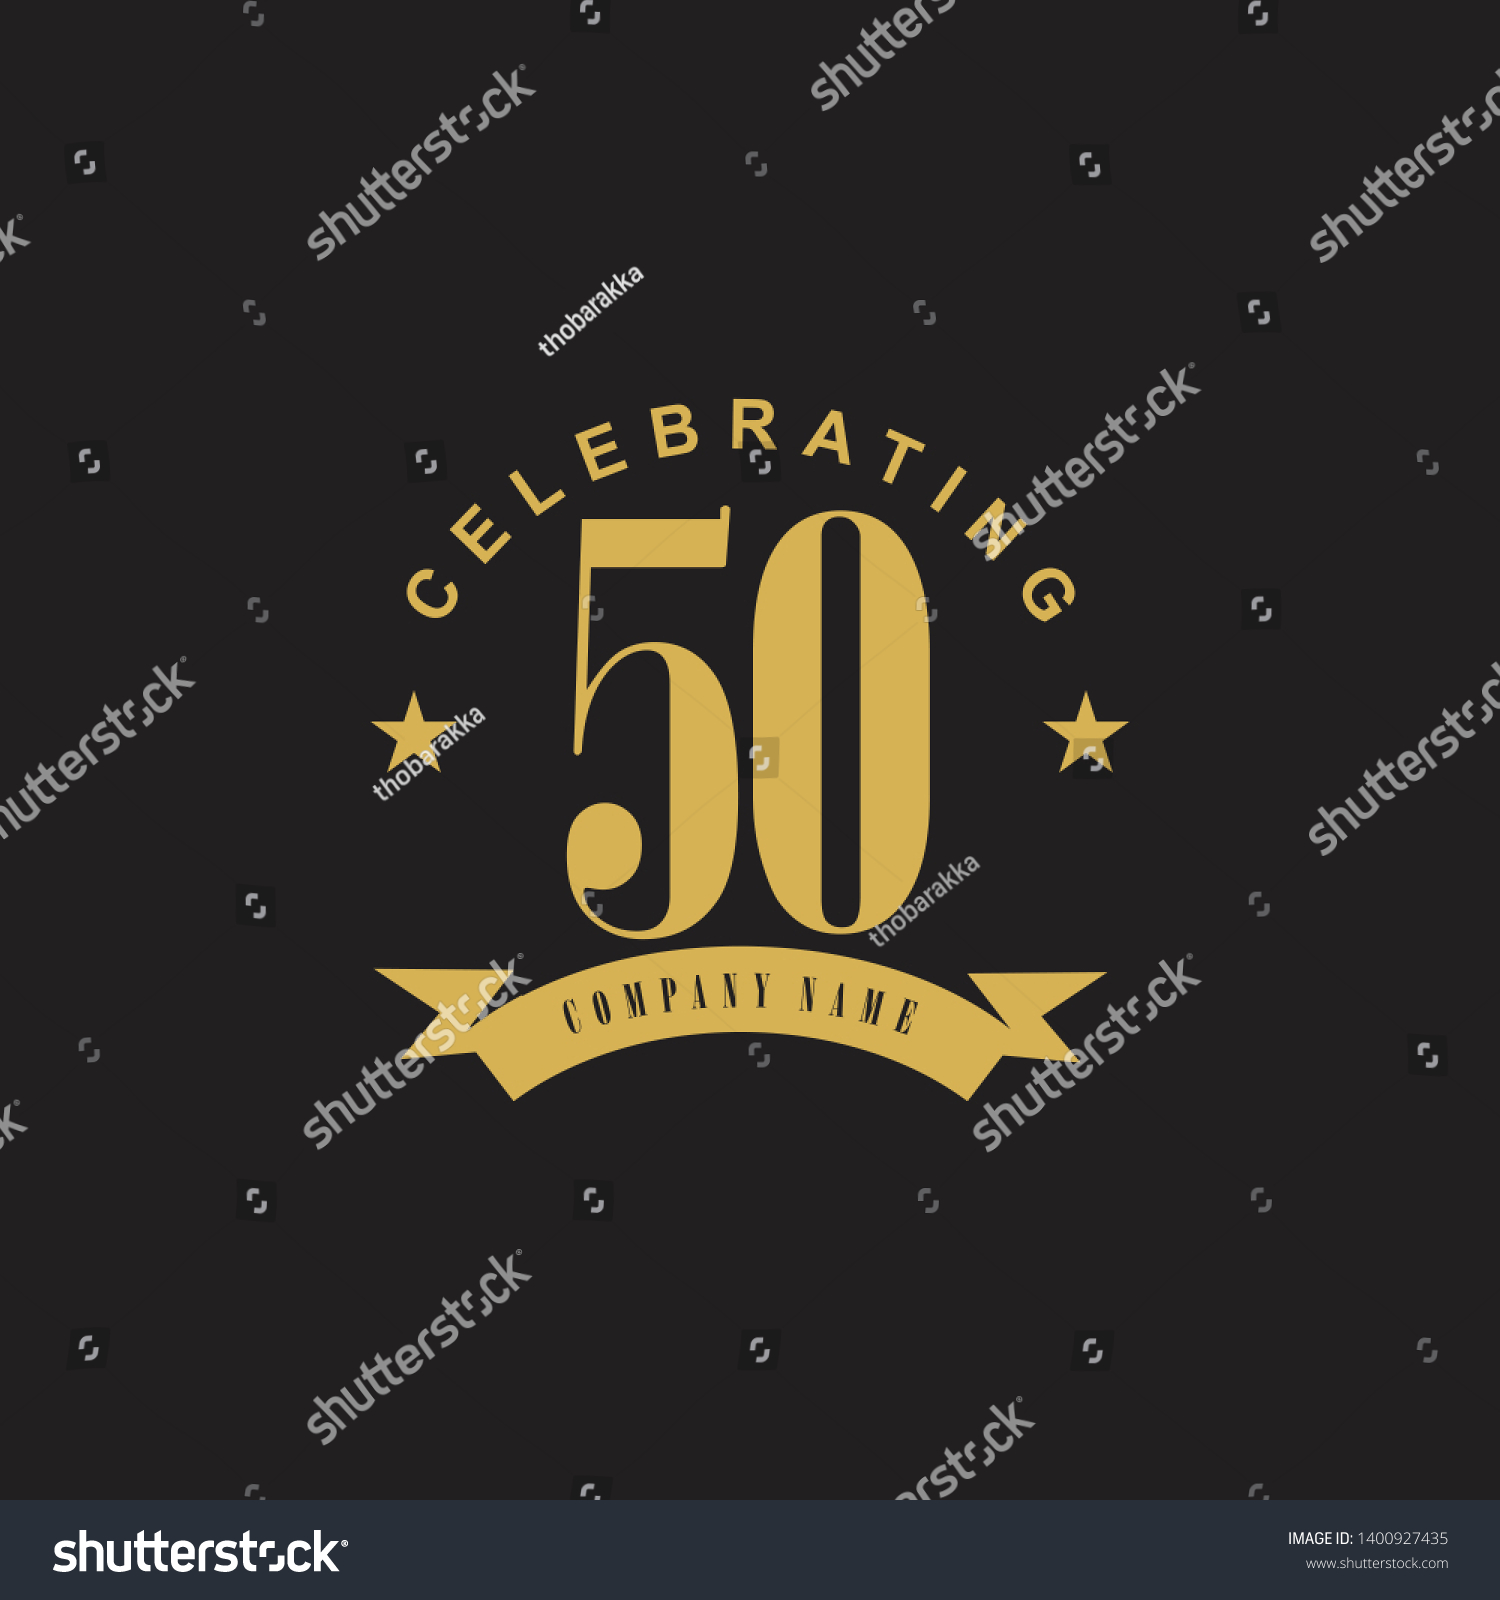 513 50th birthday balloons Images, Stock Photos & Vectors | Shutterstock